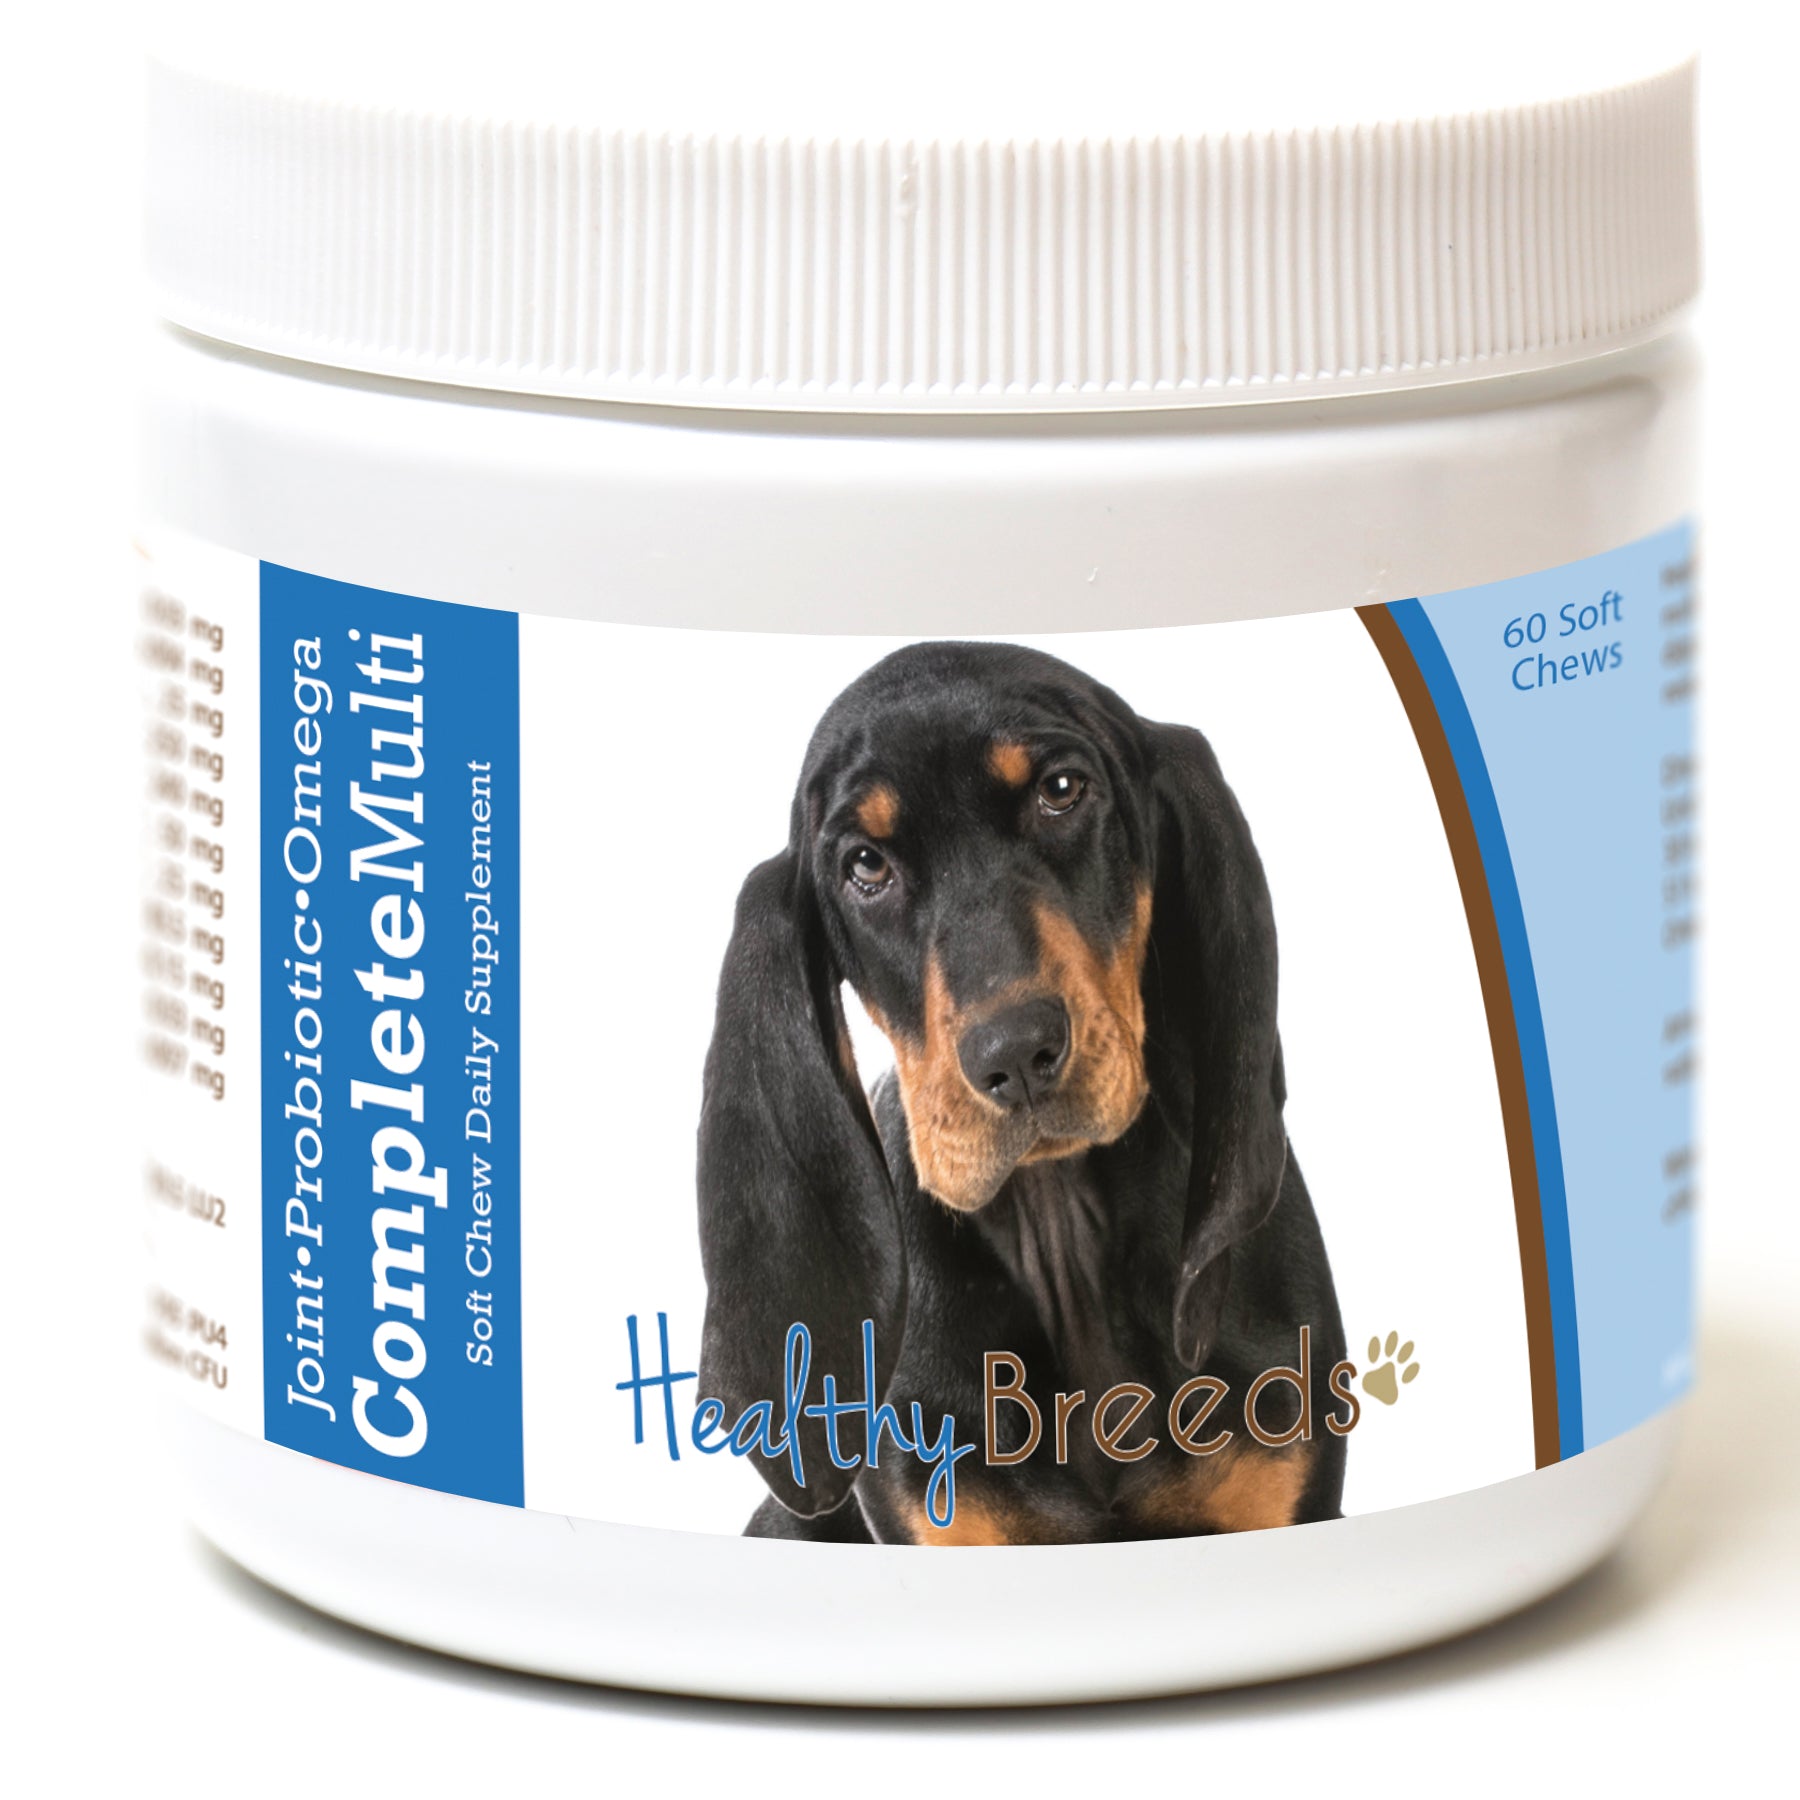 Black and Tan Coonhound All In One Multivitamin Soft Chew 60 Count